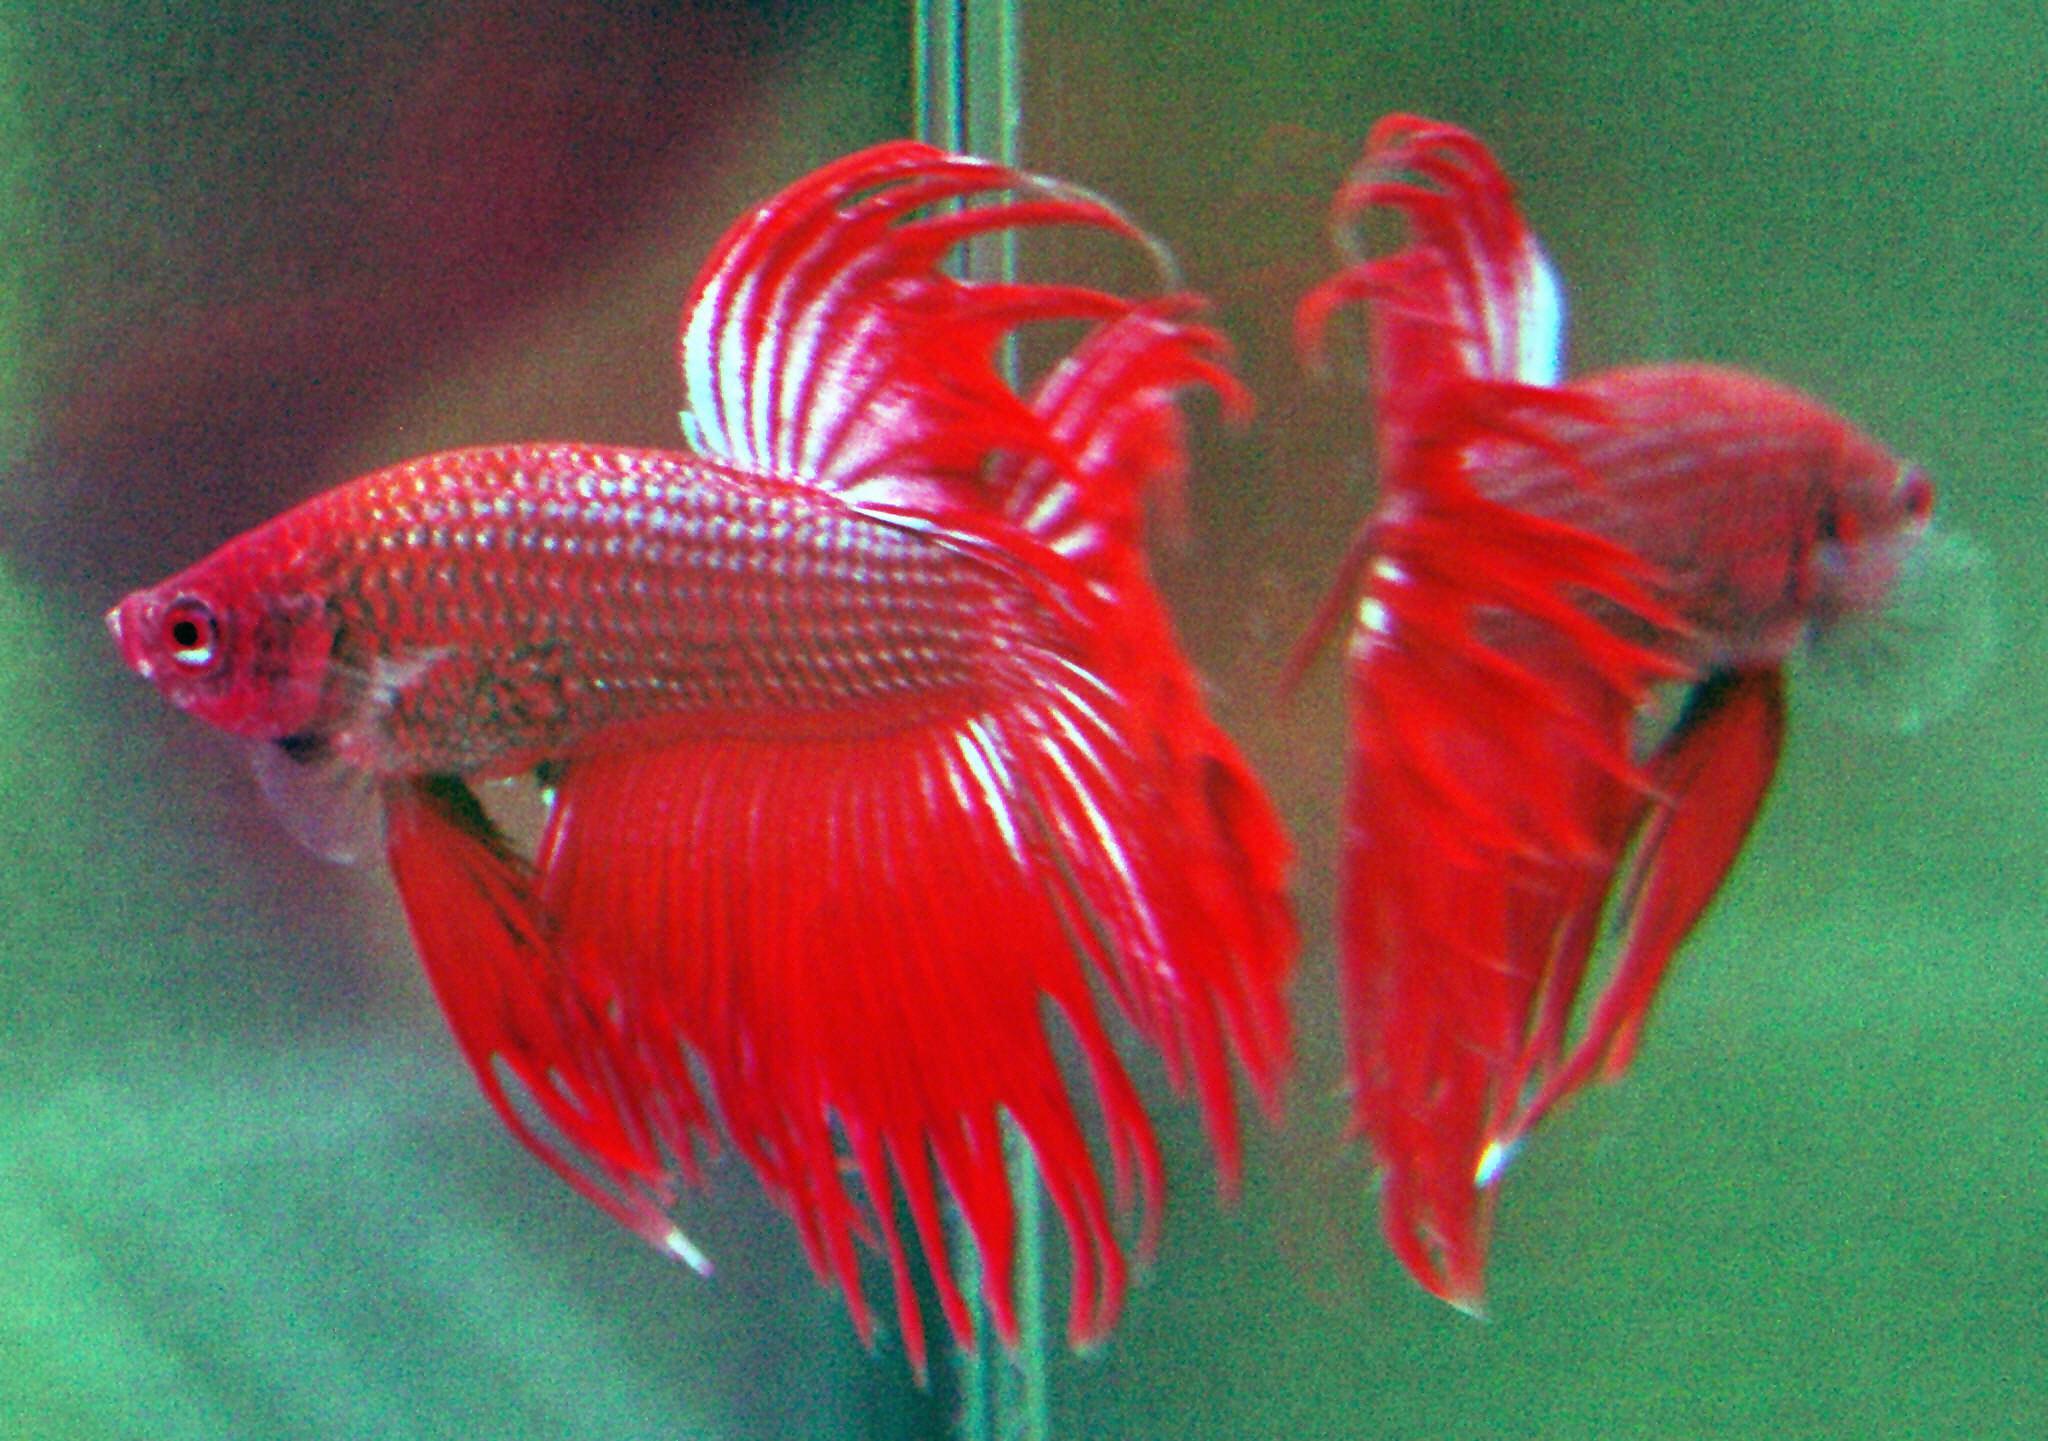 Betta fish: How does it know when there's food in the aquarium?